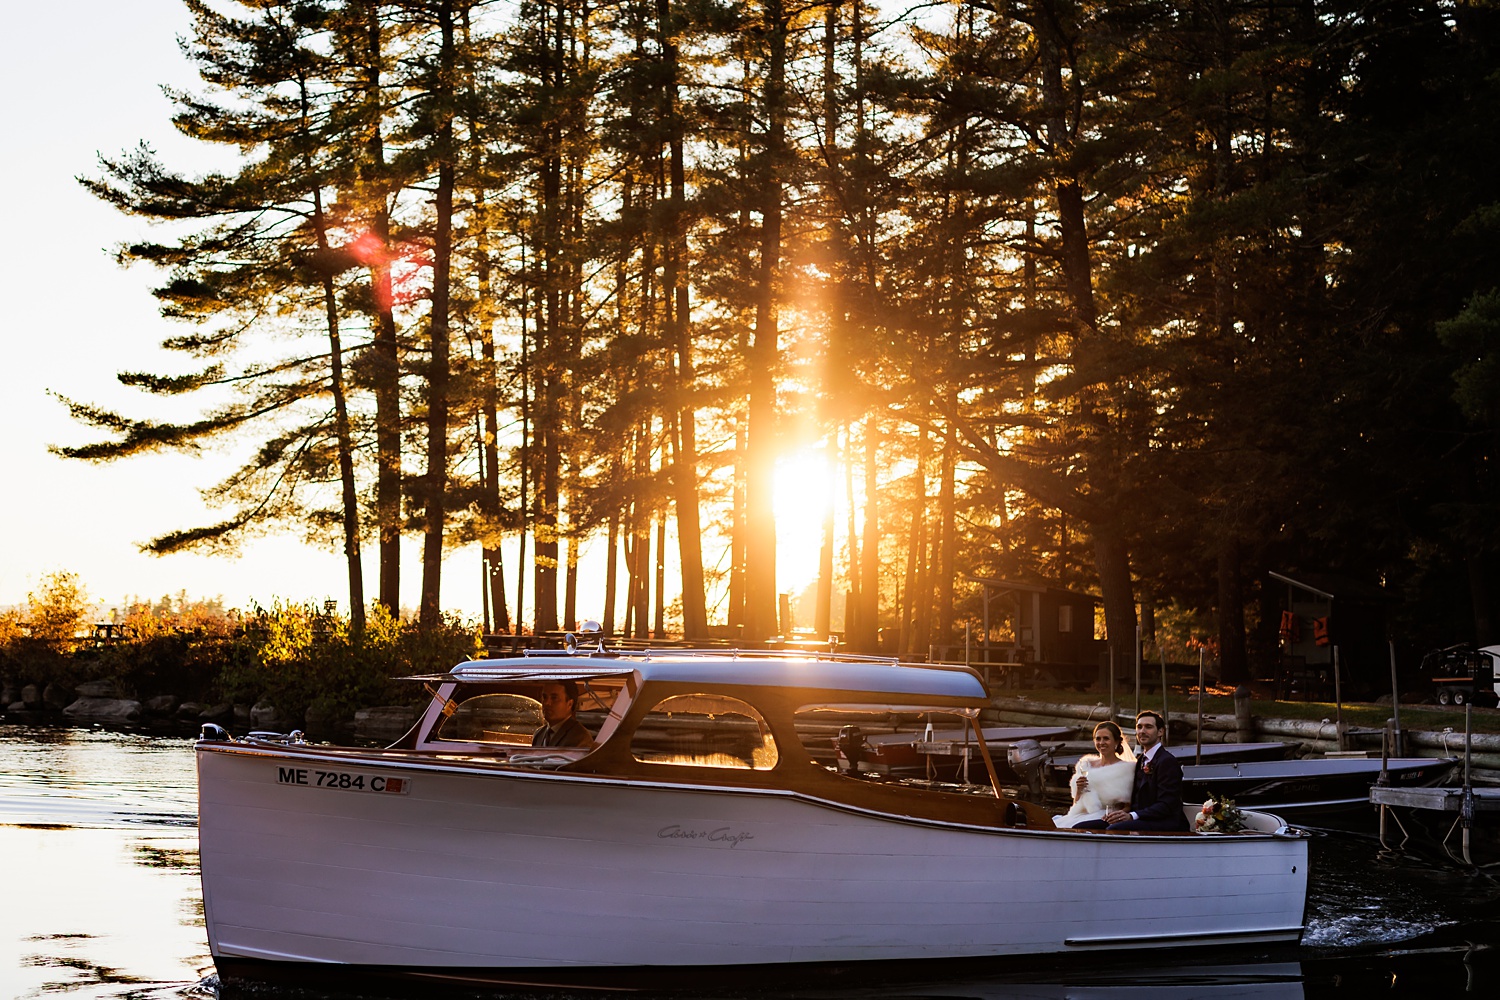 The bright orange sun on the wedding day of the couple out on the waters of Sebago Lake Maine